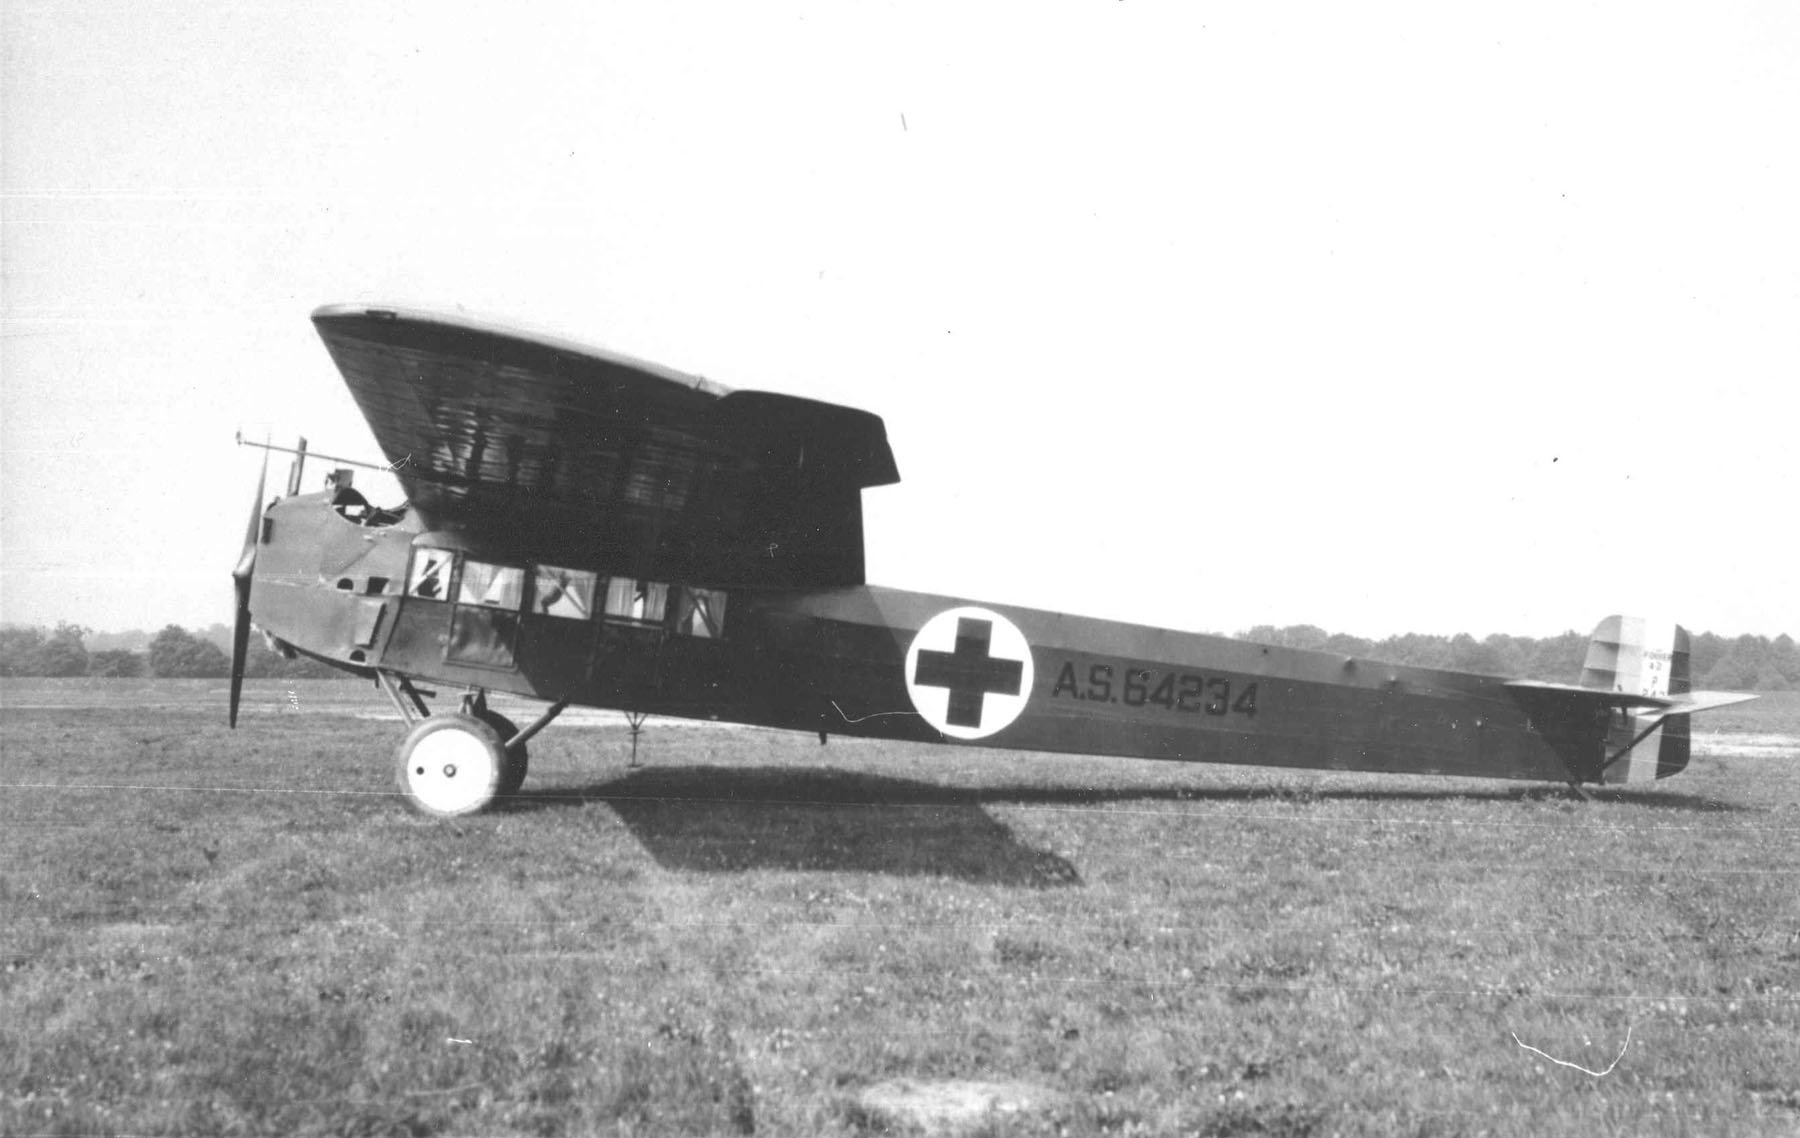 The second Fokker T-2, A.S. 64234, also designated A-2 (ambulance). (U.S. Air Force)